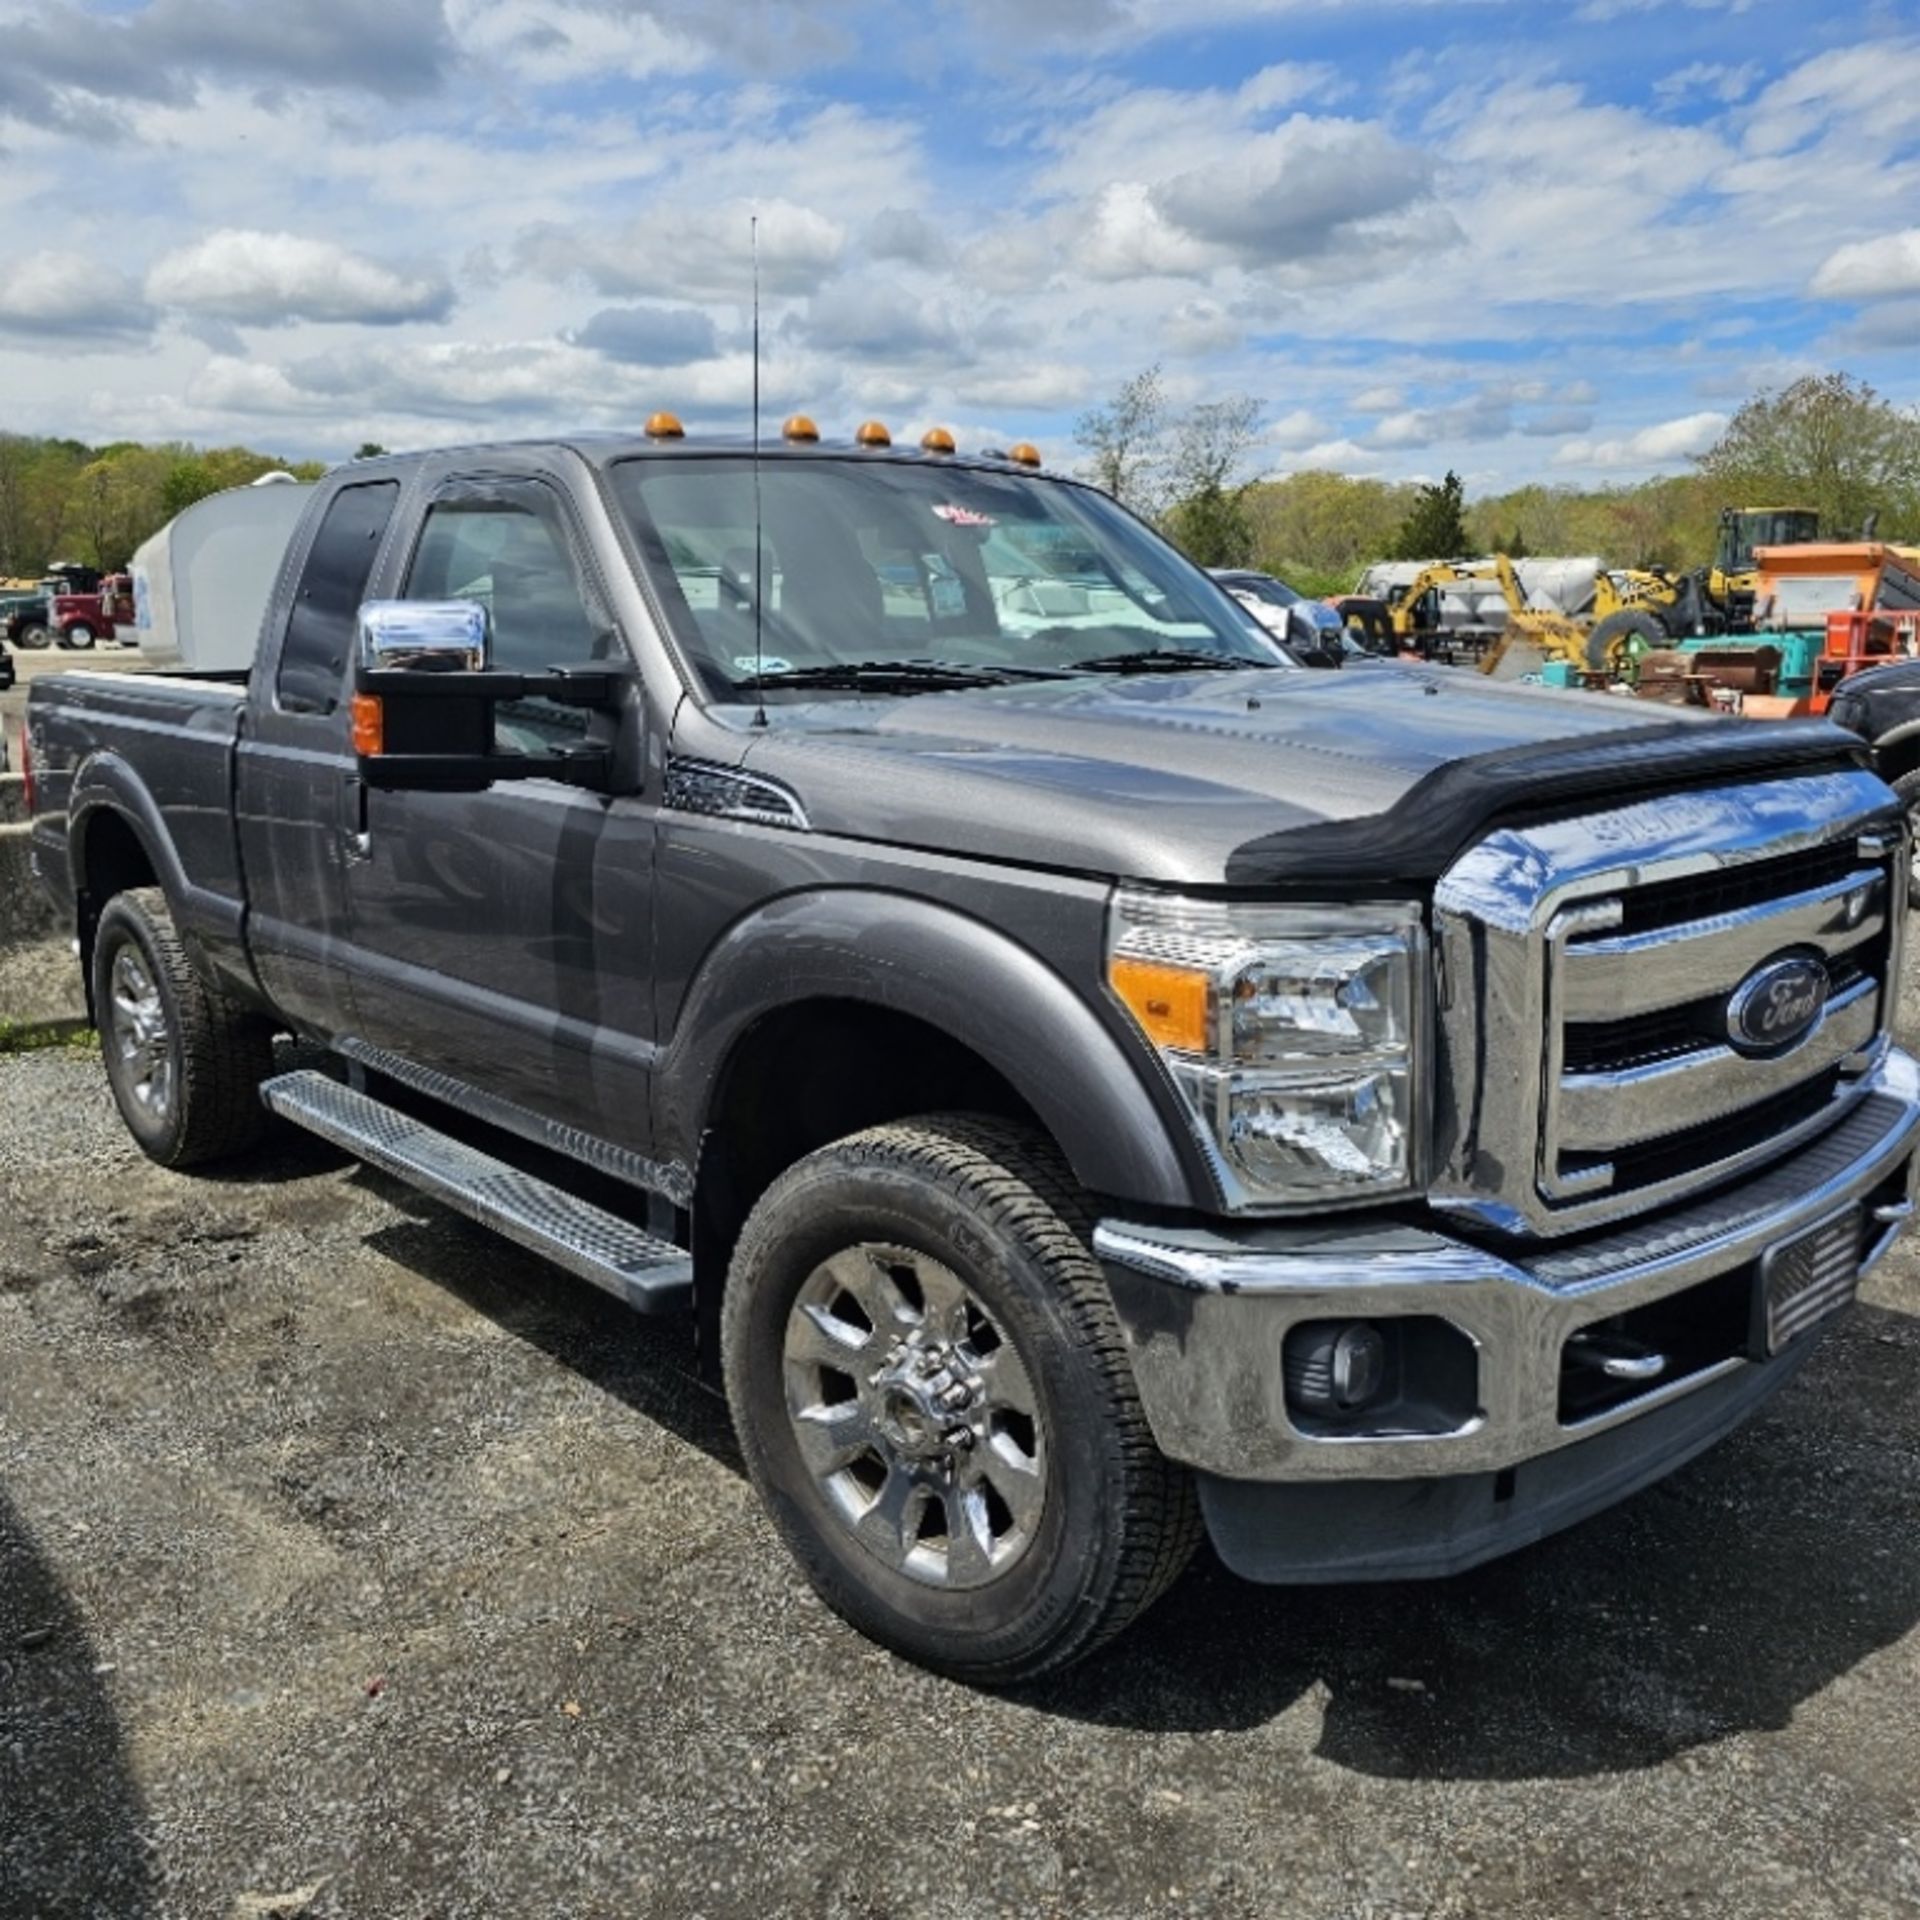 2014 Ford F250 Pickup - Image 2 of 10